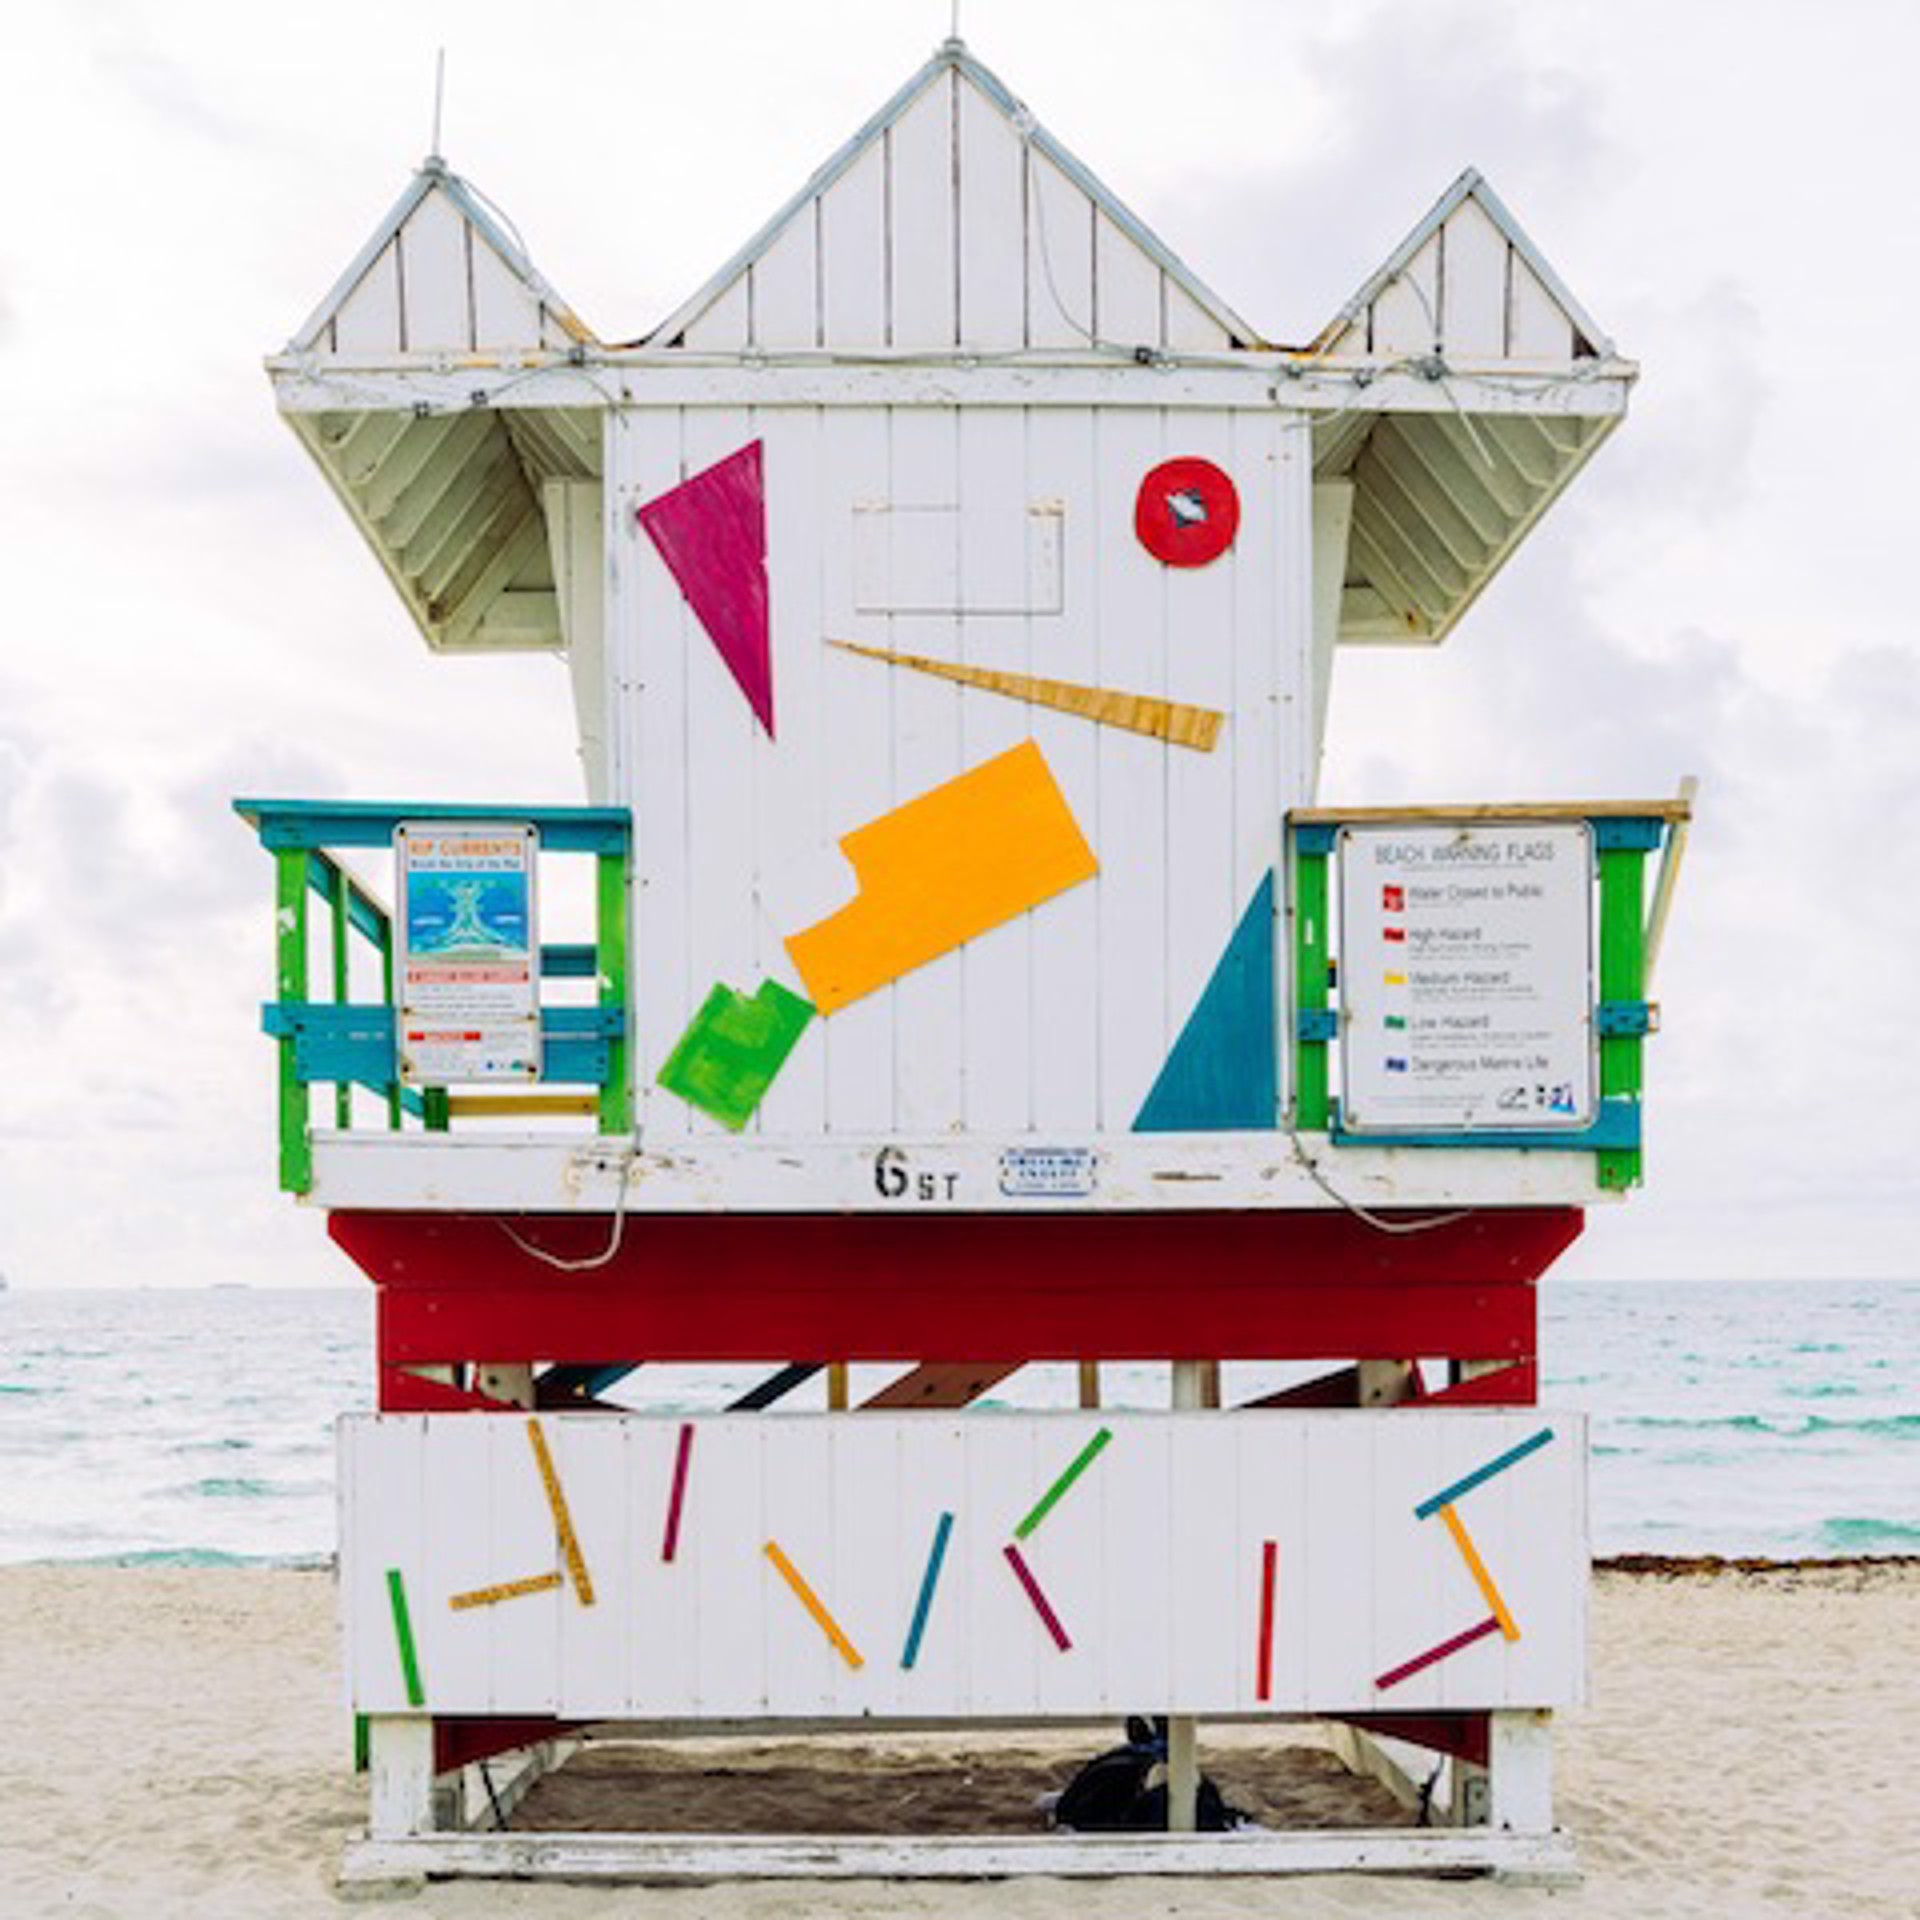 6th Street Lifeguard Stand by Peter Mendelson